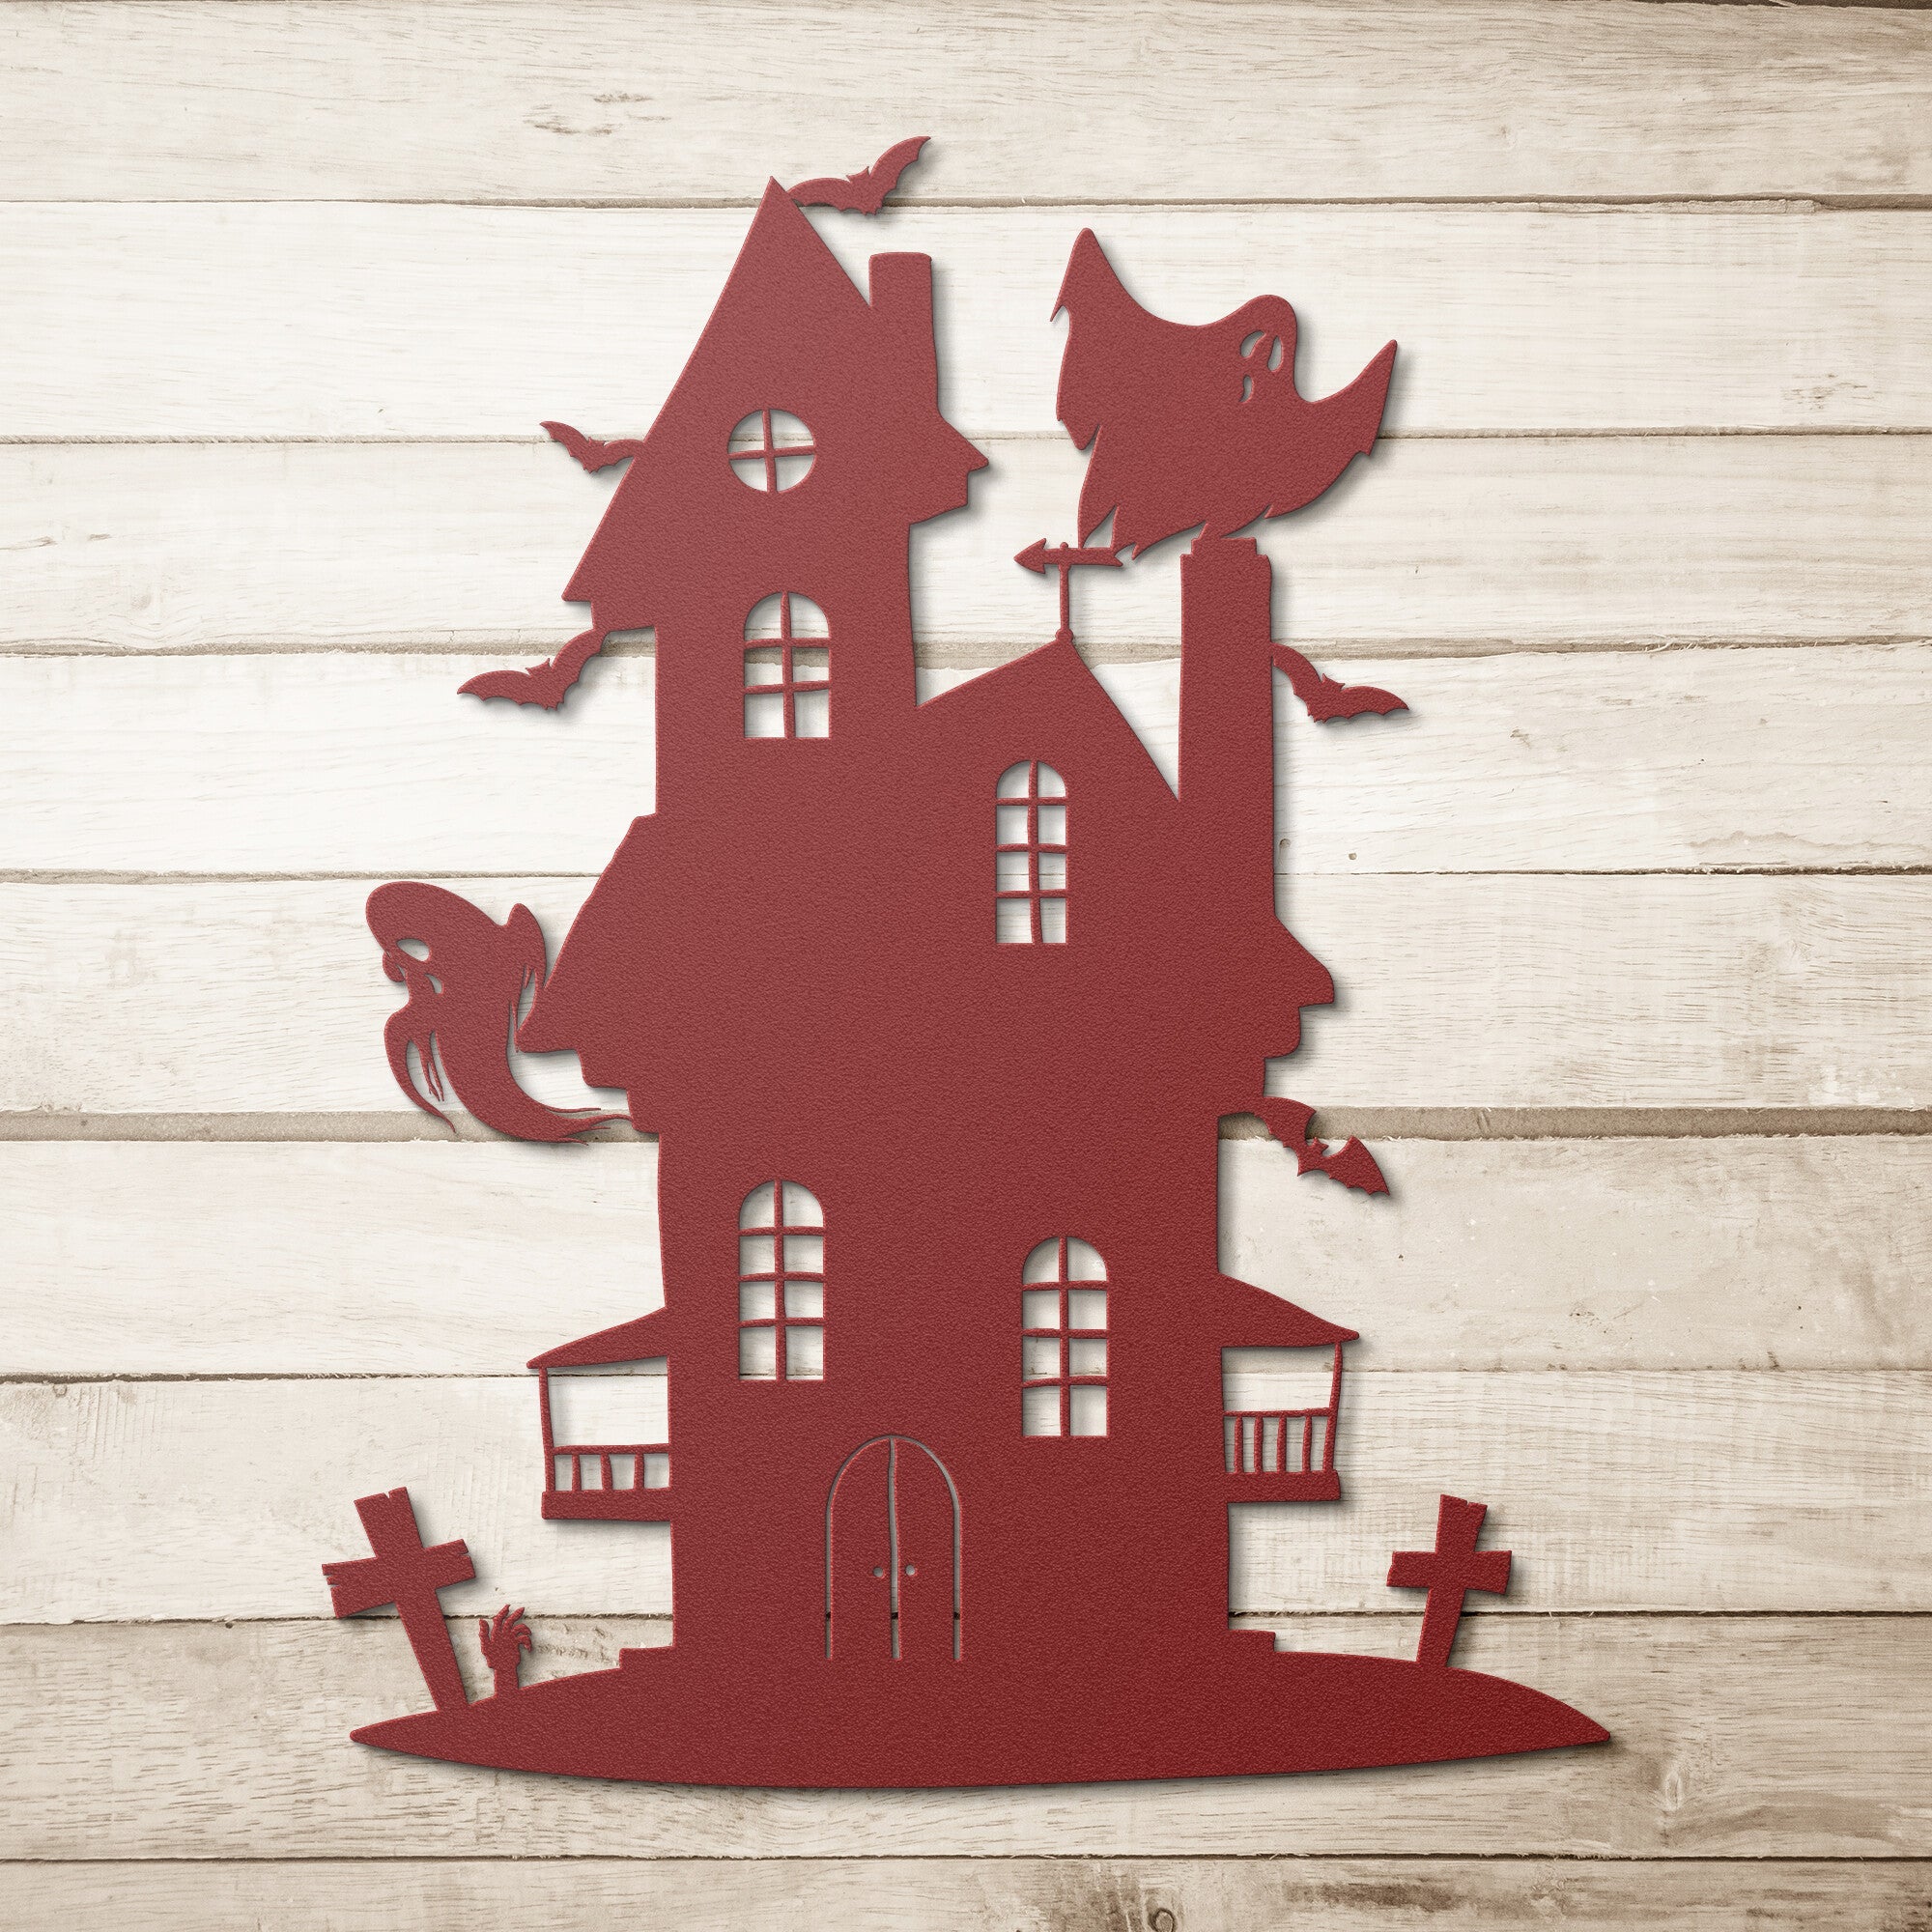 The Halloween House - Cool Metal Signs